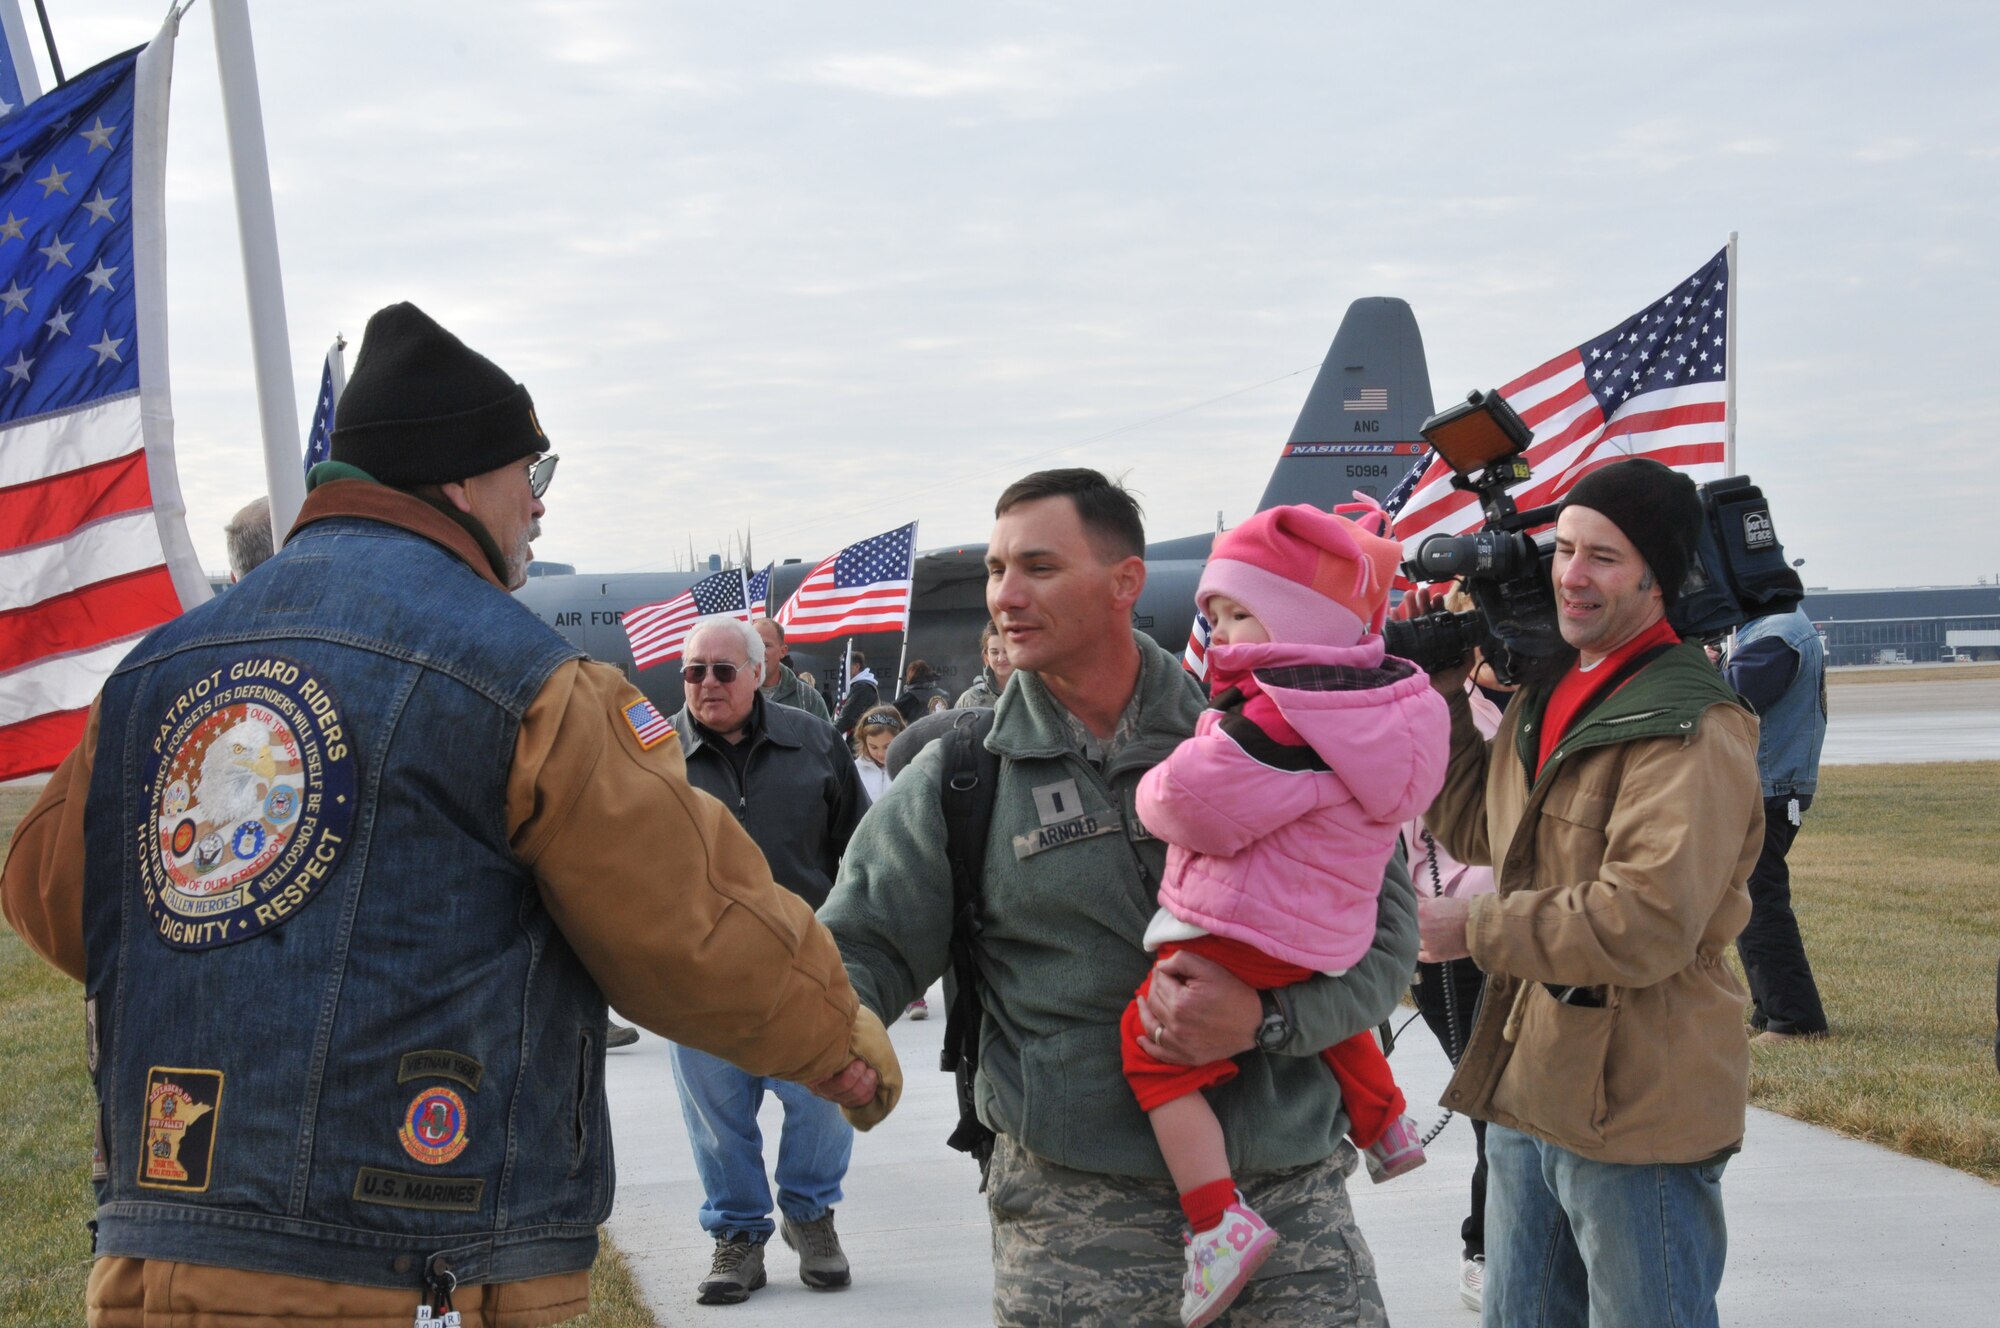 Airmen and family members walk through a line of Patriot Guard Riders in front of the 133rd Airlift Wing operations building on Dec. 21, 2011. The airmen returned from six months in Kuwait supporting Operation New Dawn and are from the 133rd Civil Engineer Squadron of the Minnesota Air National Guard. They have been working with buildings and utilities at bases in Kuwait as the U. S. military pulled out of Iraq. USAF photo by Senior Airman Kennith Veillon